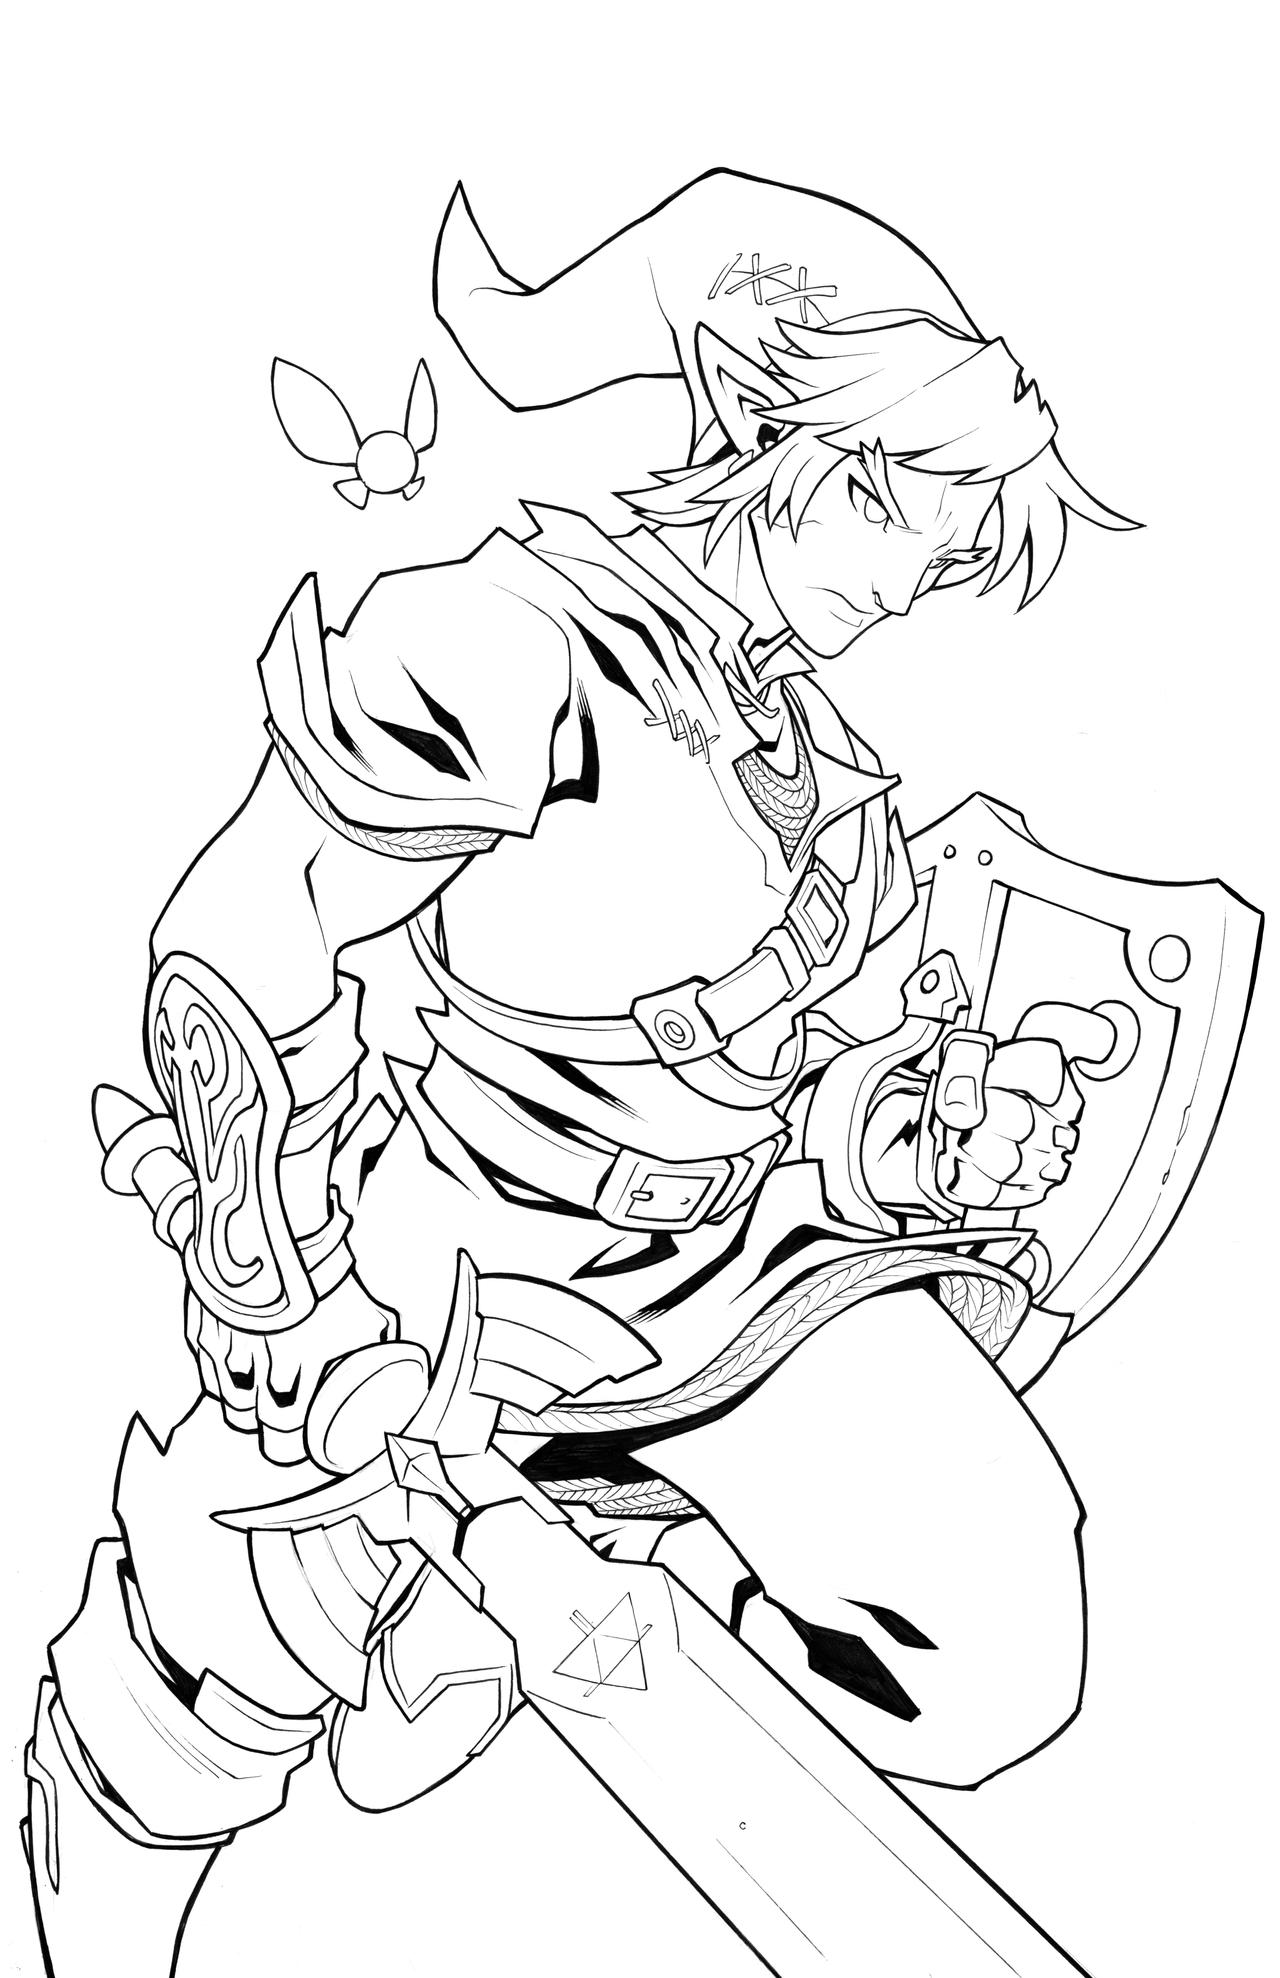 toon link coloring pages